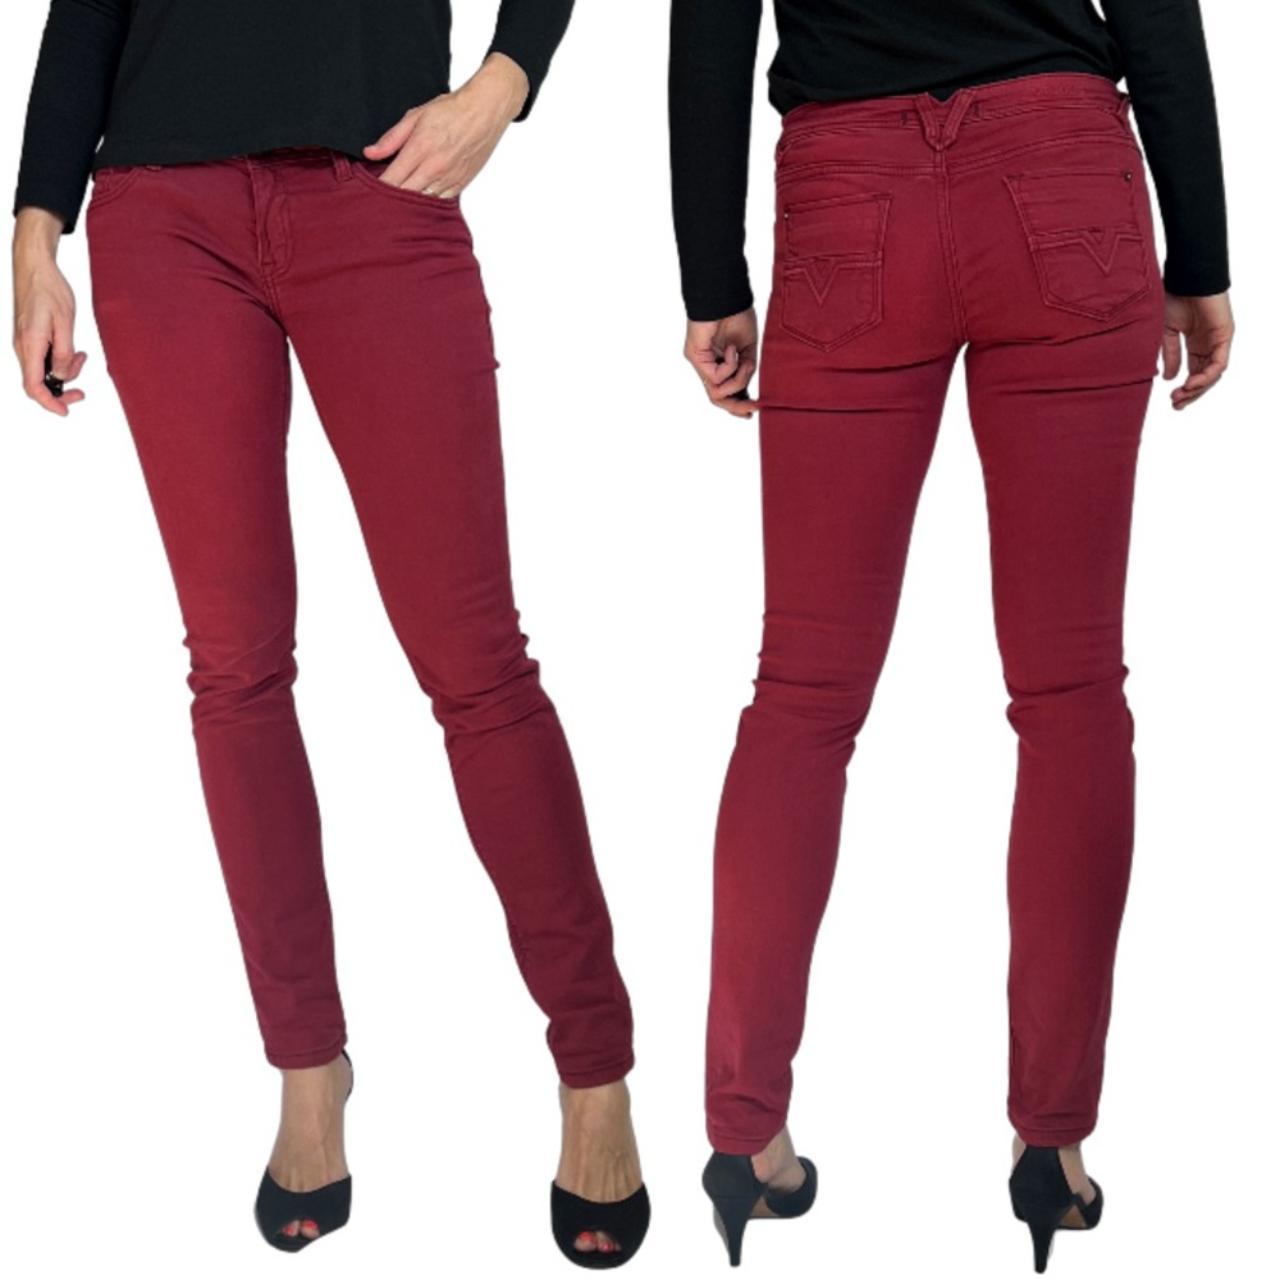 Red very stretchy slim jeans with back pockets